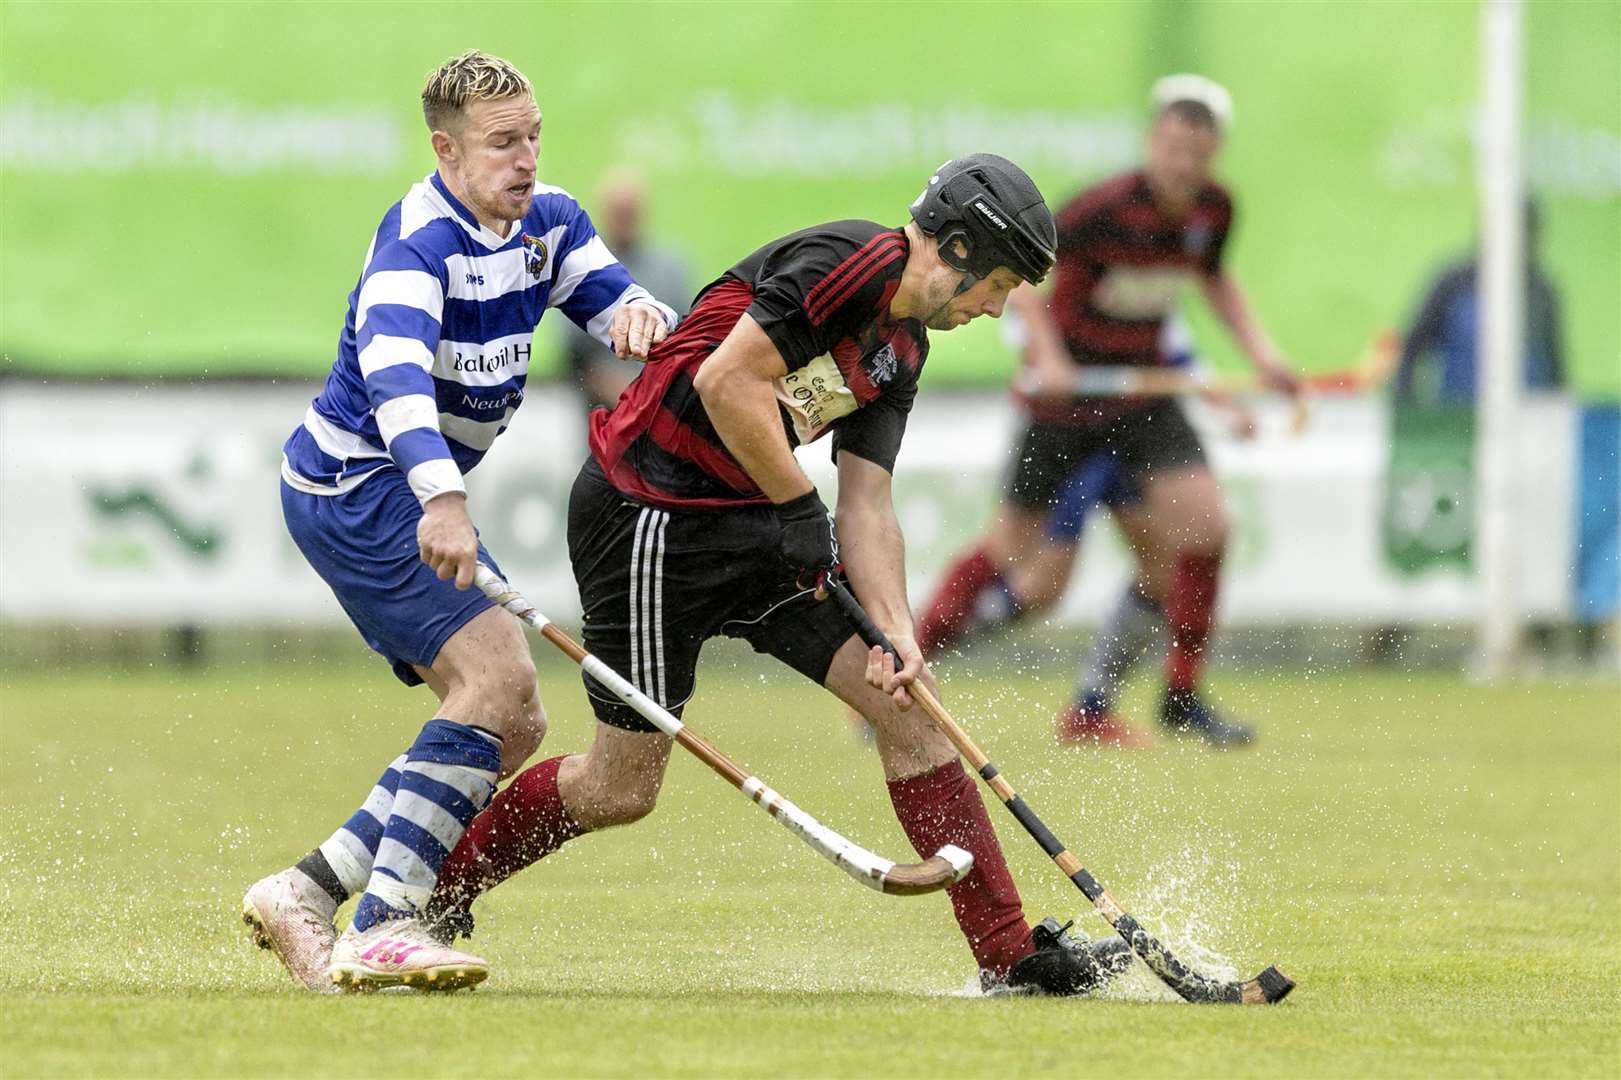 Andrew MacCuish (Oban) in front of Andy Mackintosh (N’more). Tulloch Homes Camanachd Cup Final - Newtonmore v Oban Camanachd - played at An Aird, Fort William.